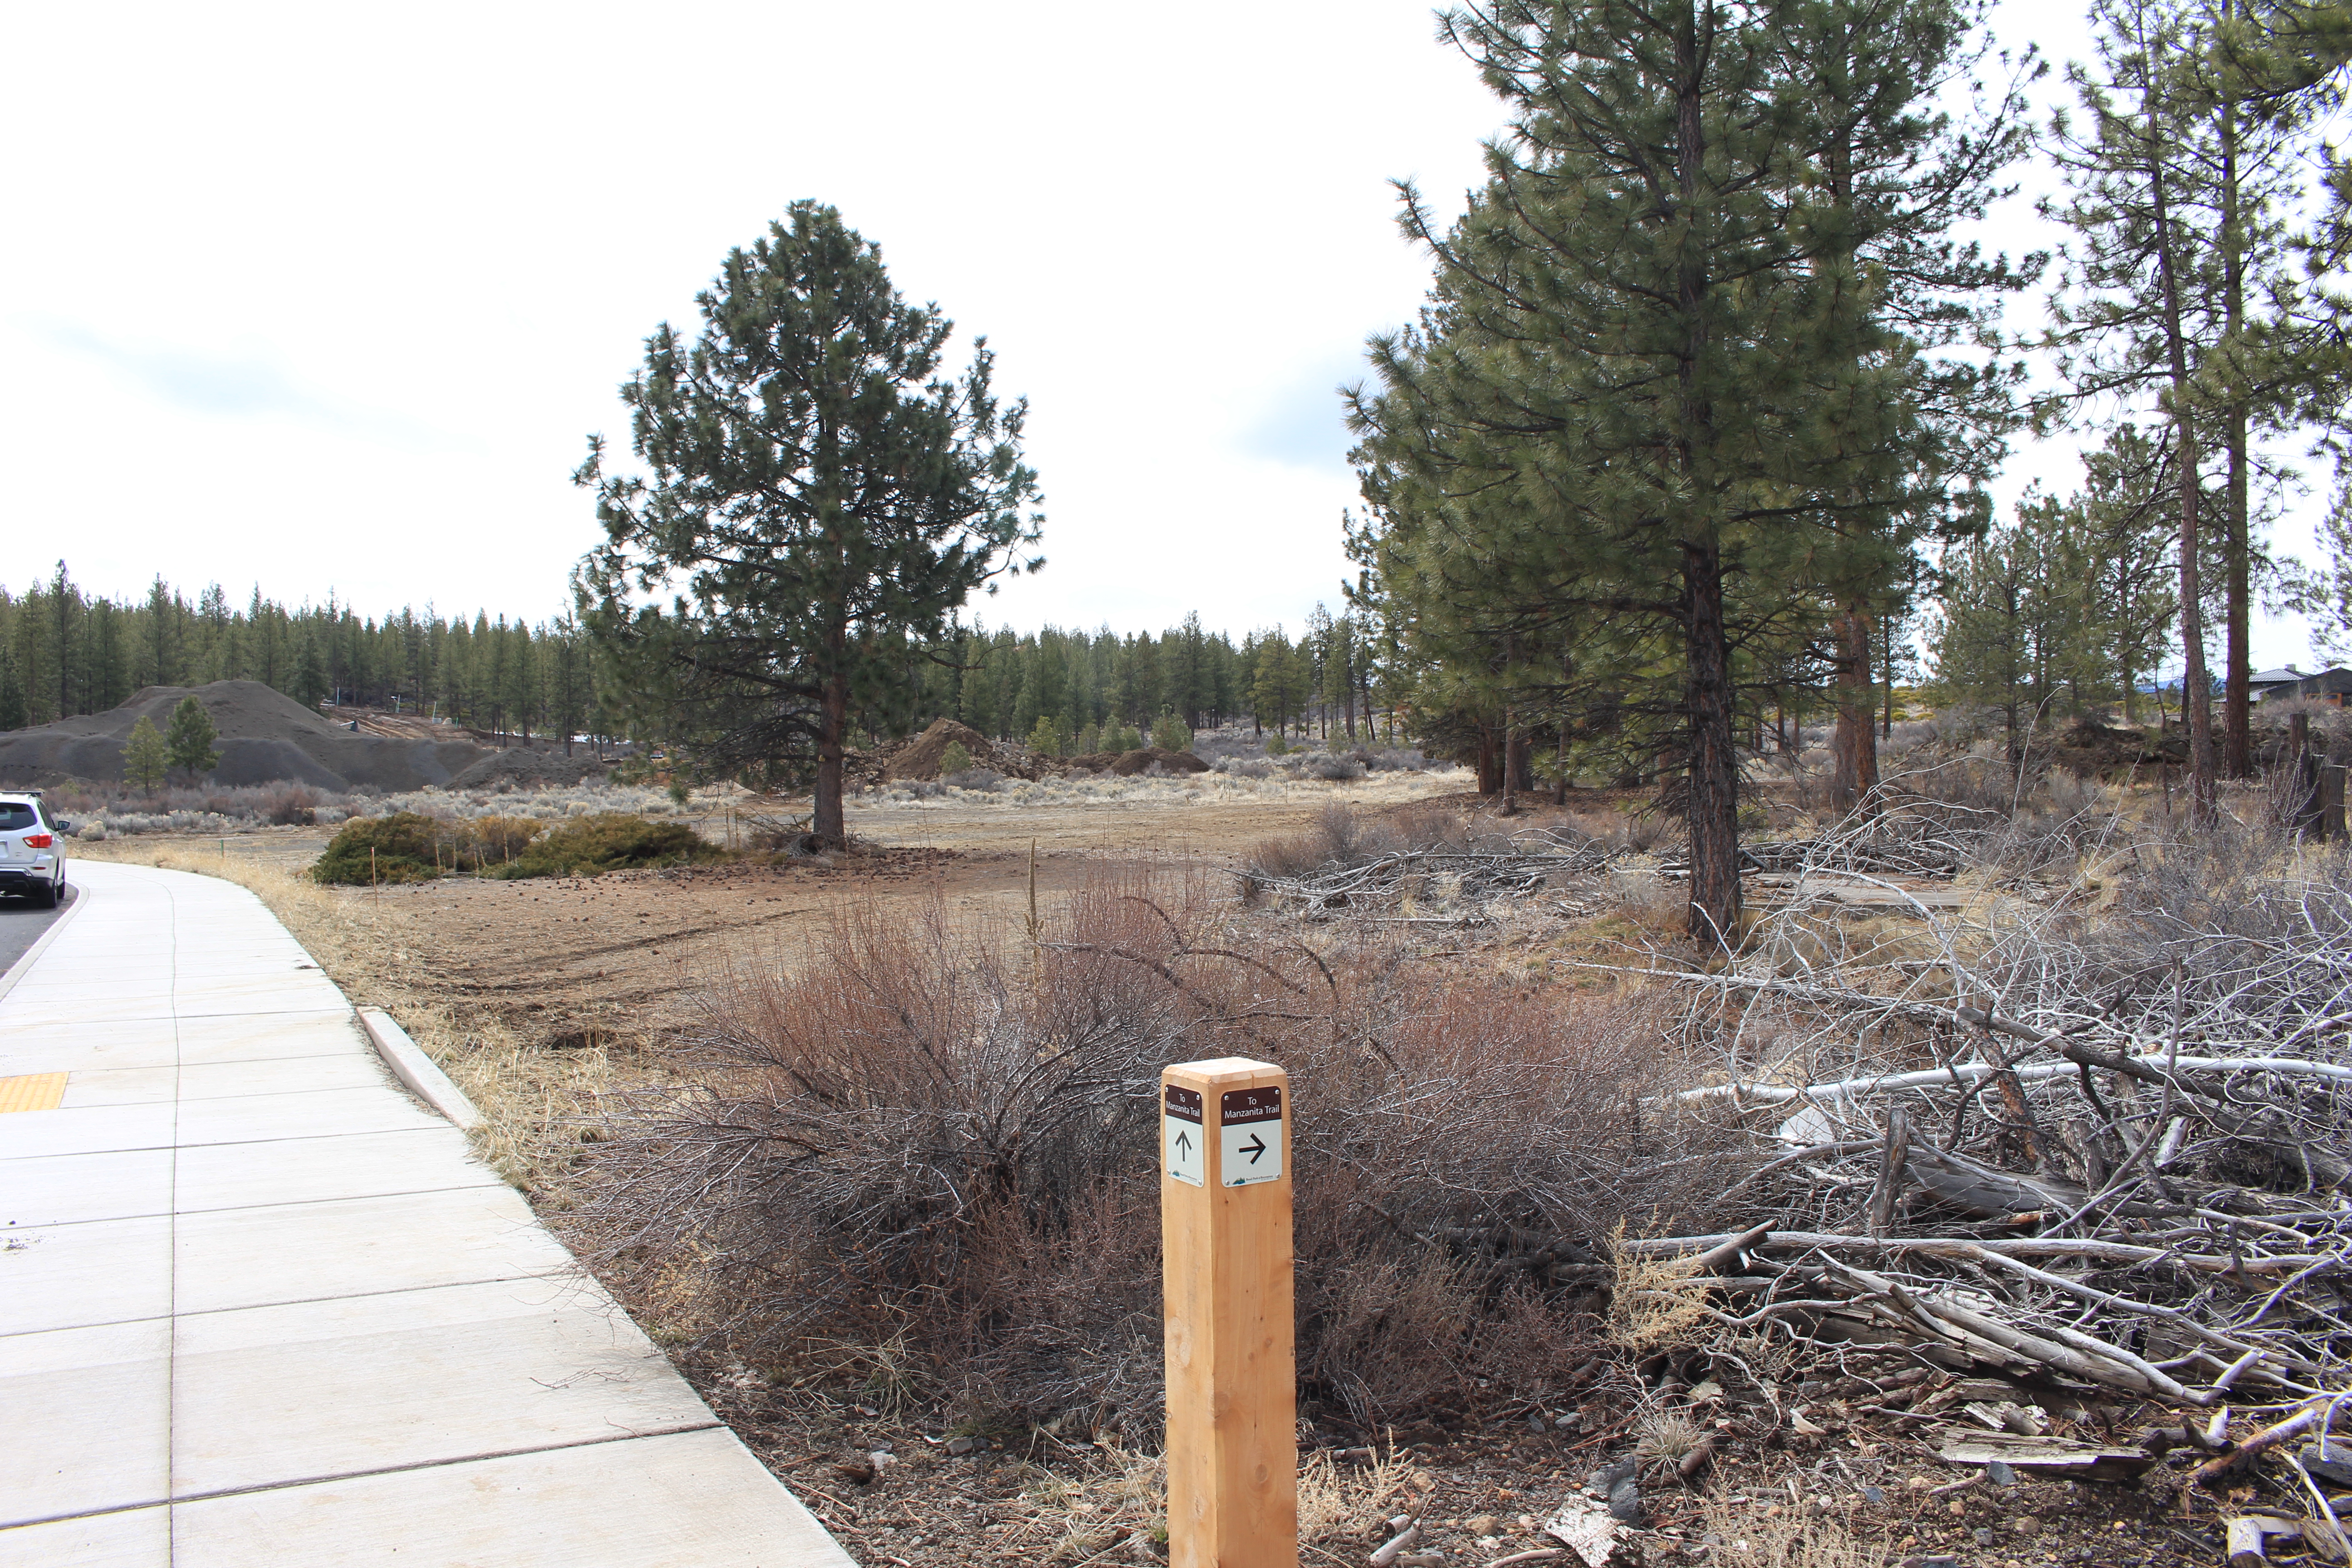 Sidewalk view of the new Shevlin West park site with trail marker